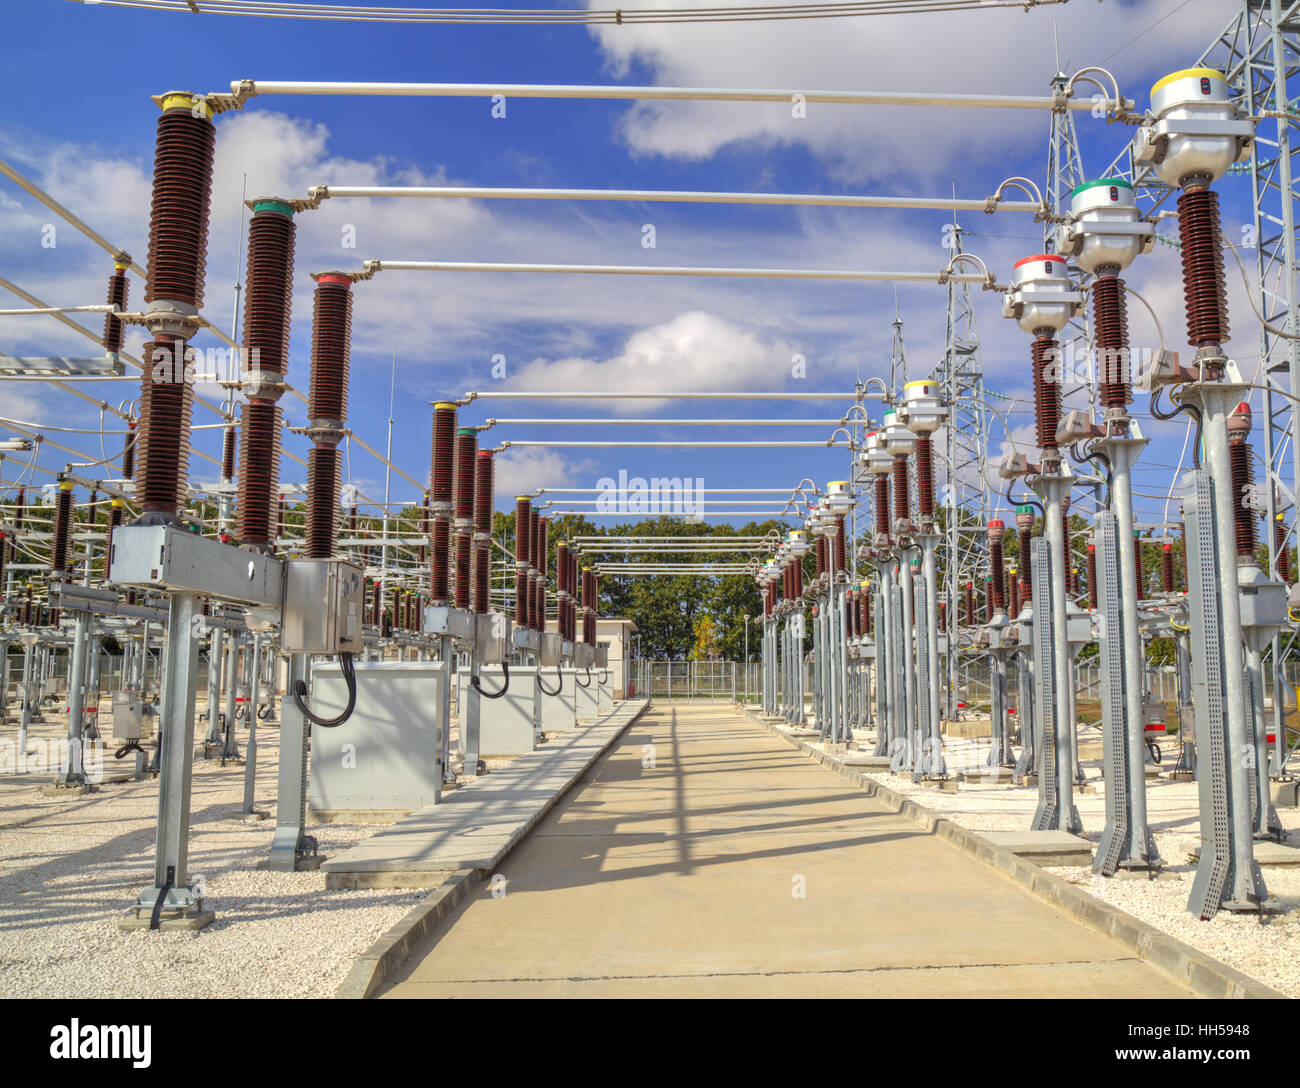 High Voltage Switchyard In Modern Electrical Substation Stock Photo